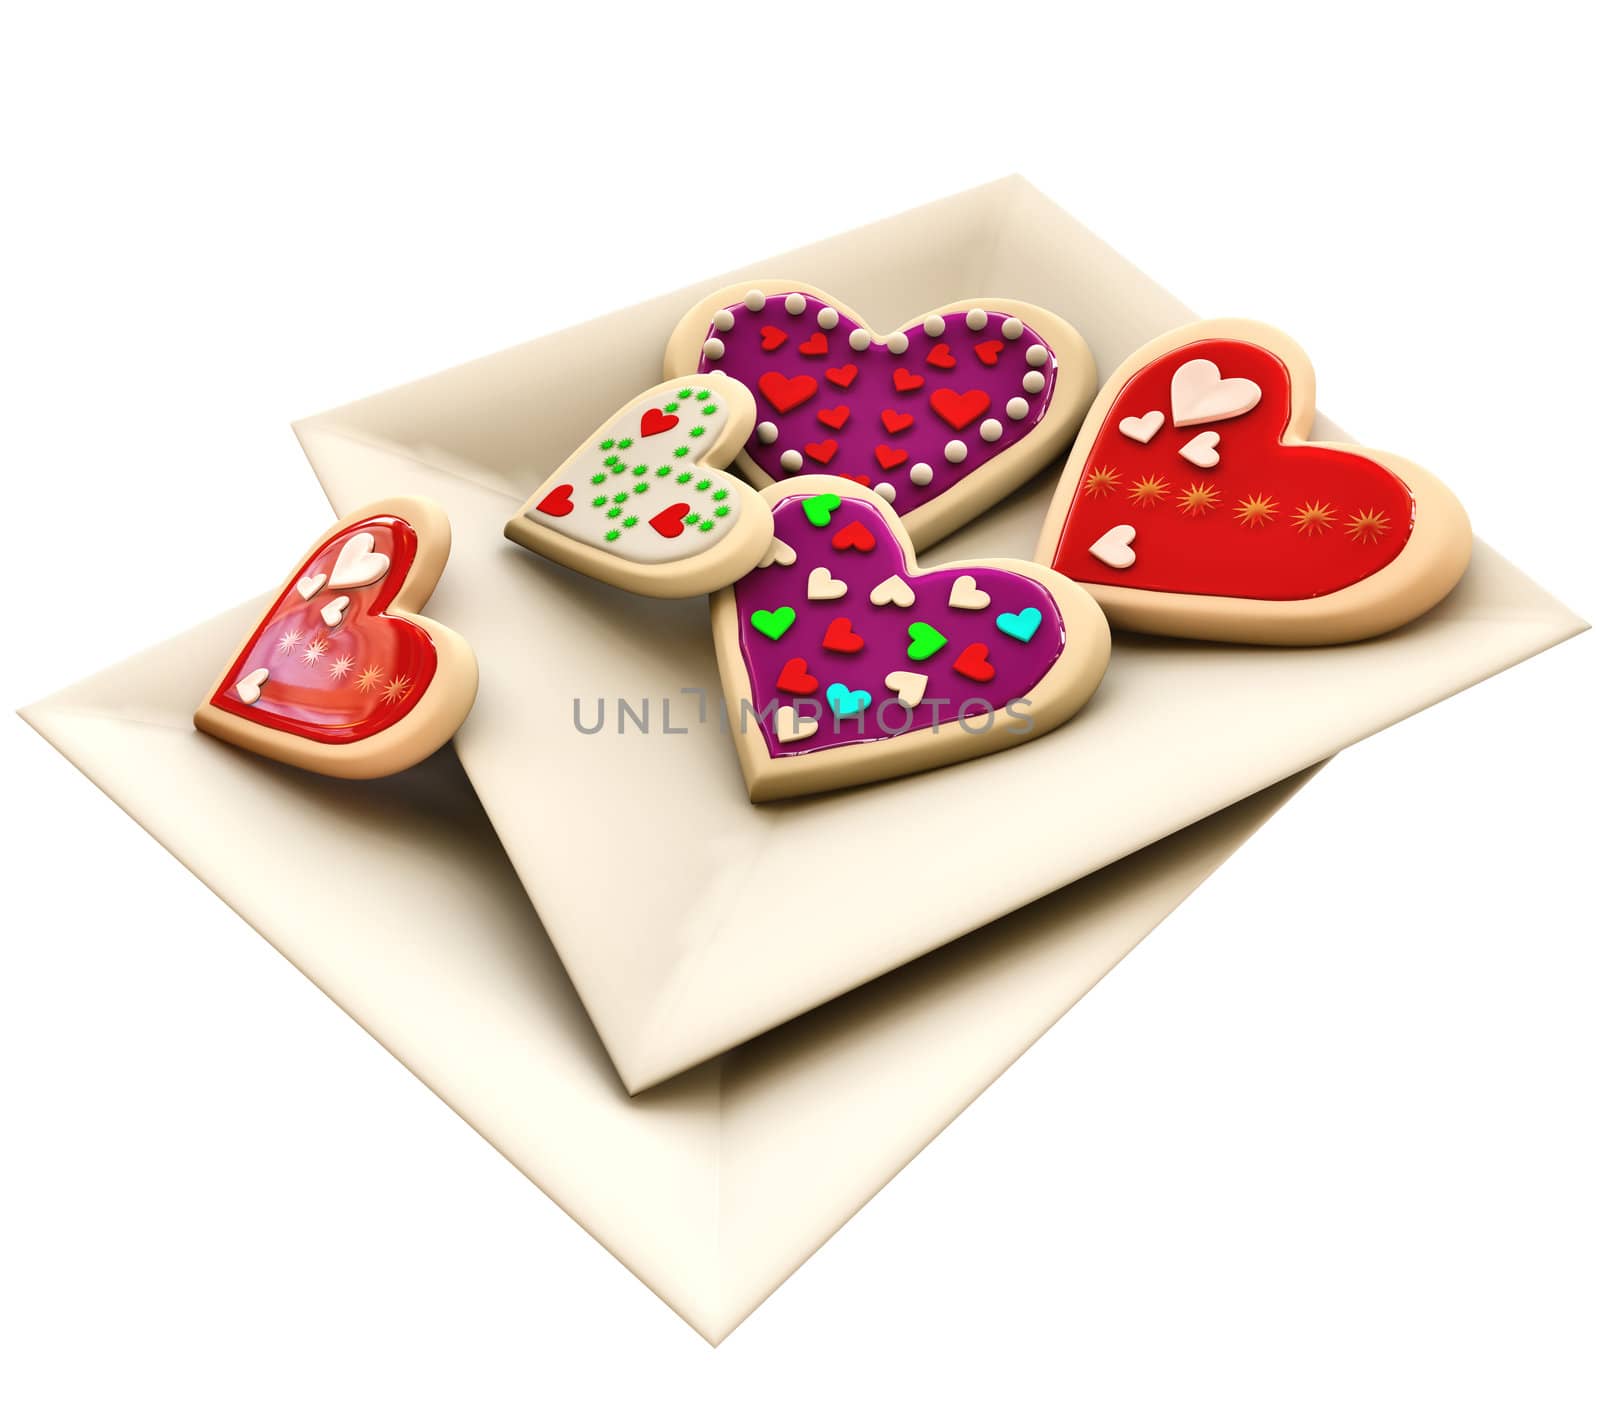 Allsorts heart-shaped cookies for Valentine's Day by merzavka